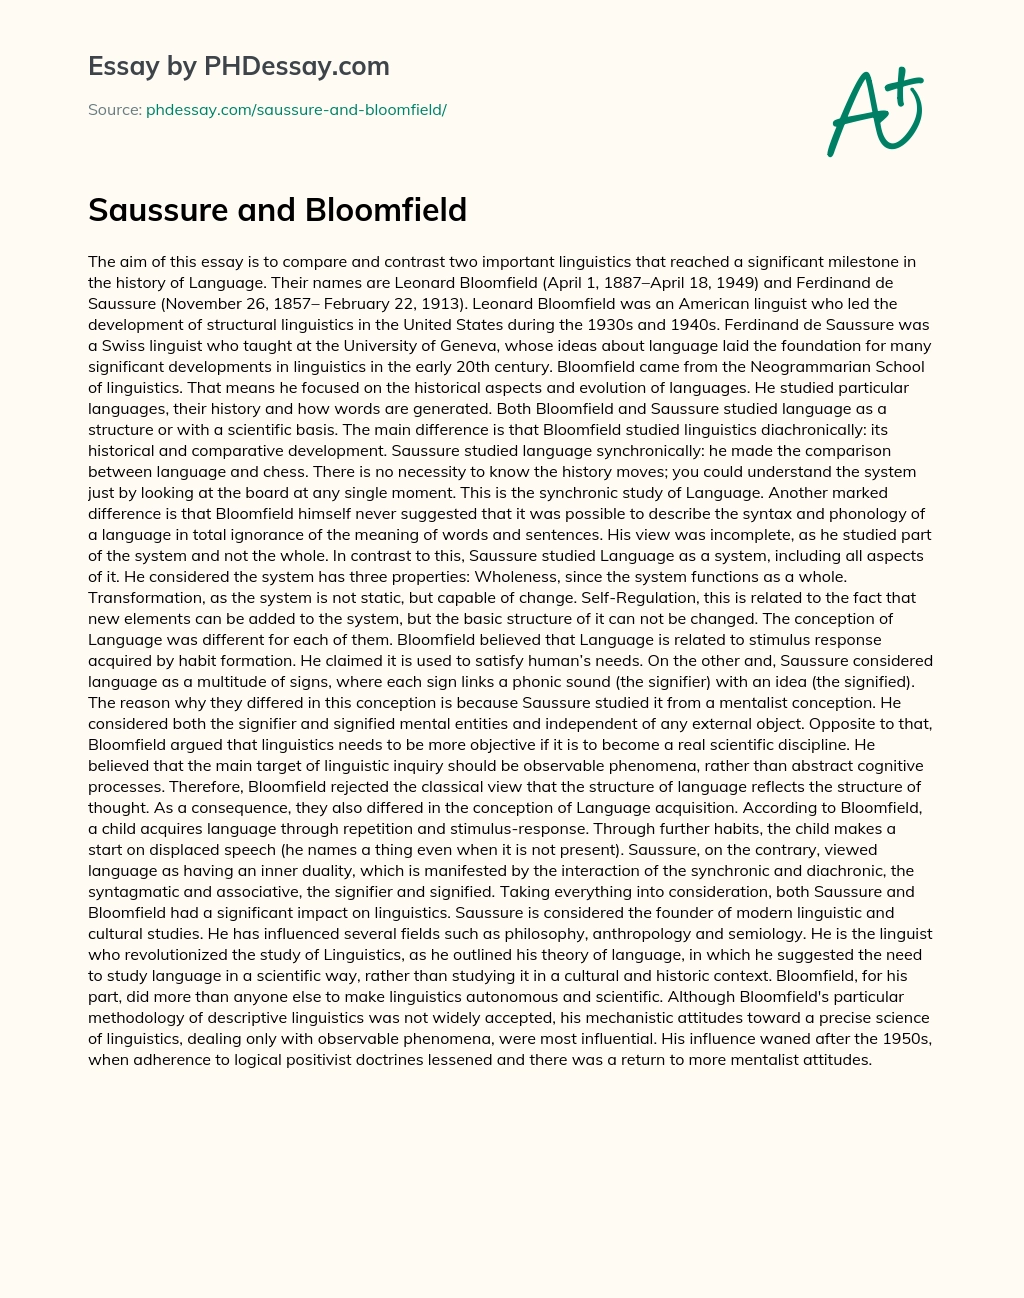 Saussure and Bloomfield essay